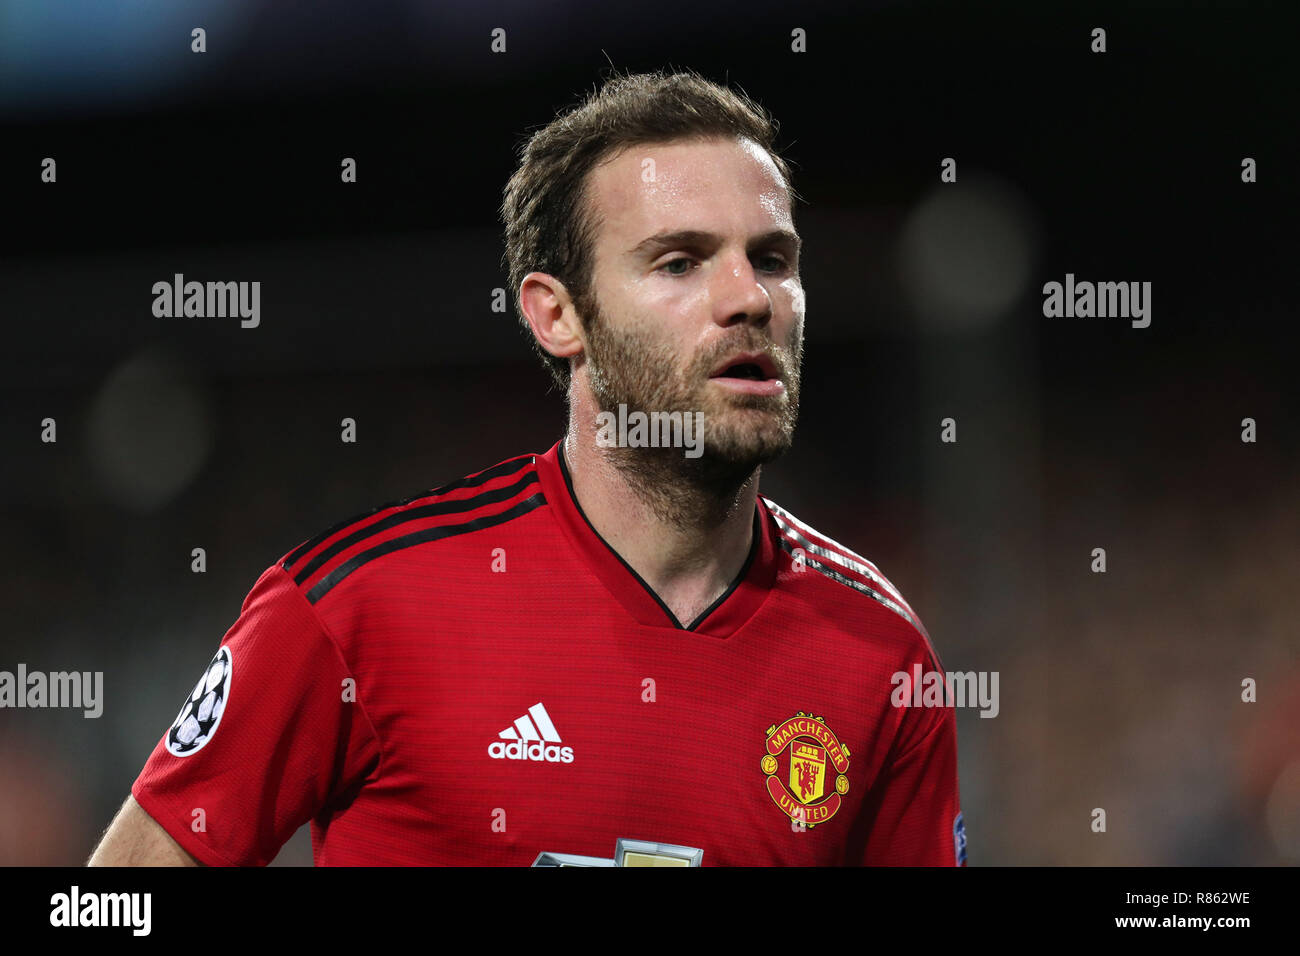 Valencia, Spain. 12th Dec, 2018. December 12, 2018 - Valencia, Spain - .Juan Mata of Manchester United during the UEFA Champions League, Group H football match between Valencia CF and Manchester United on December 12, 2018 at Mestalla stadium in Valencia, Spain Credit: Manuel Blondeau/ZUMA Wire/Alamy Live News Stock Photo